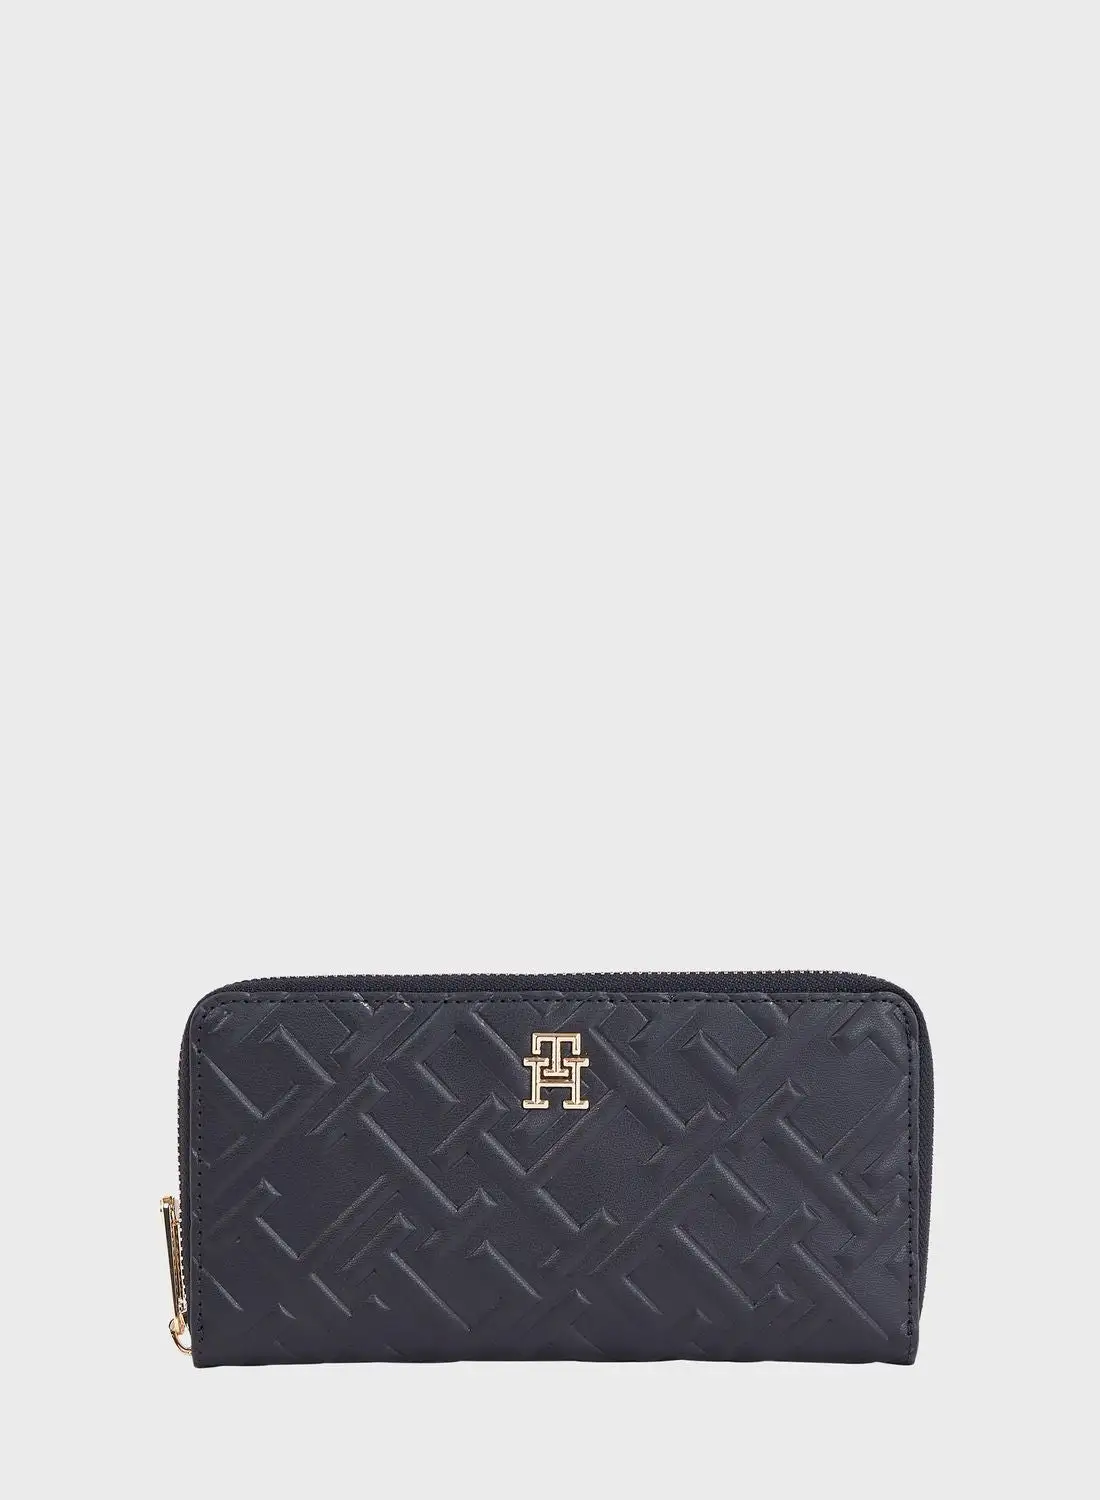 TOMMY HILFIGER Iconic Zip Around Large Wallet